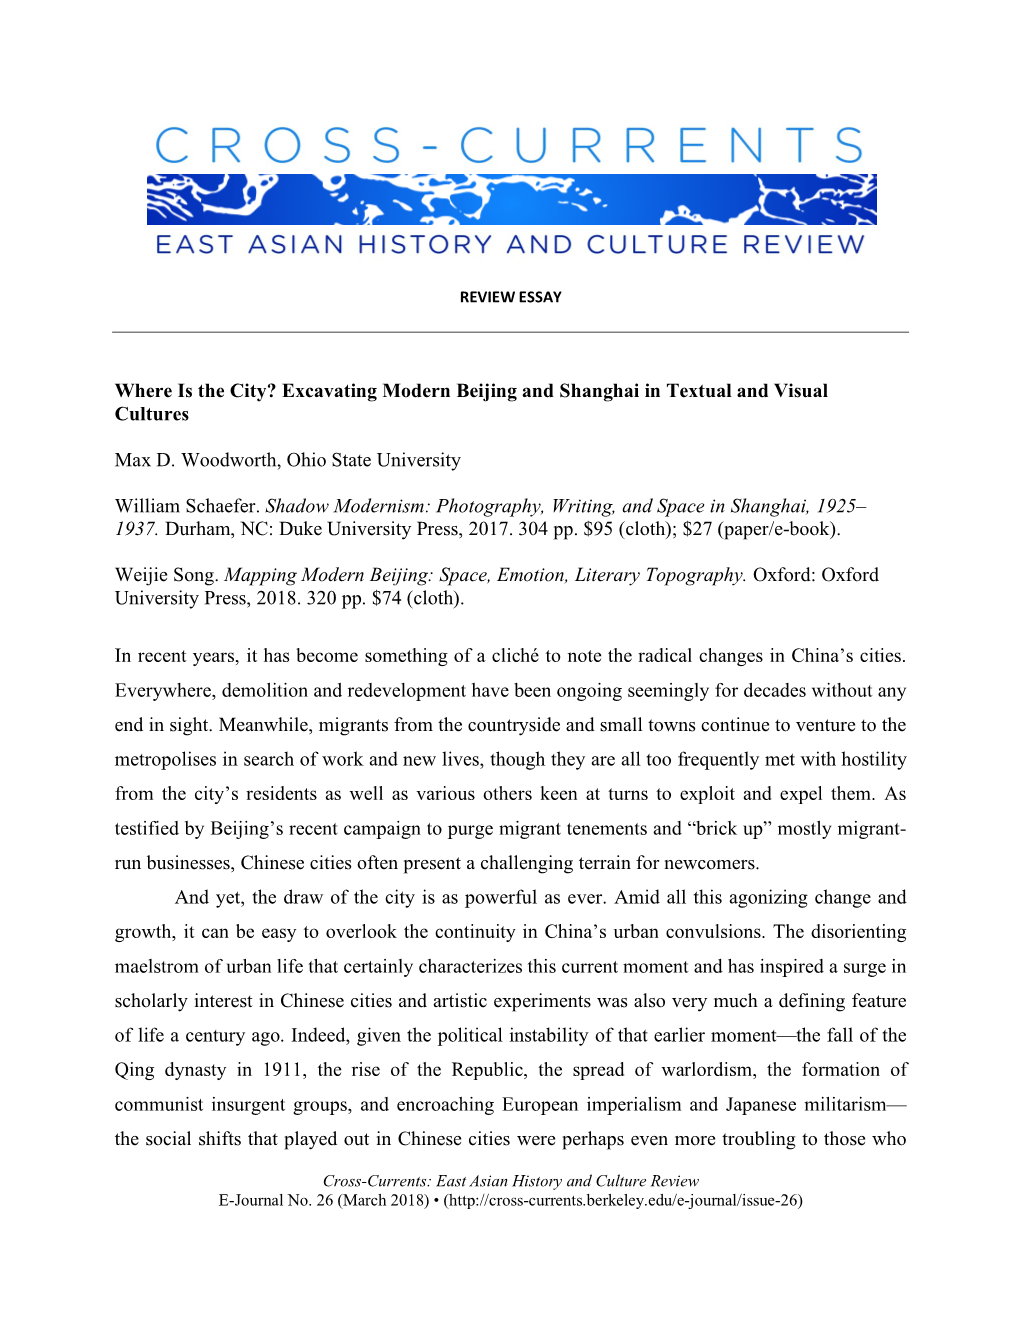 Where Is the City? Excavating Modern Beijing and Shanghai in Textual and Visual Cultures